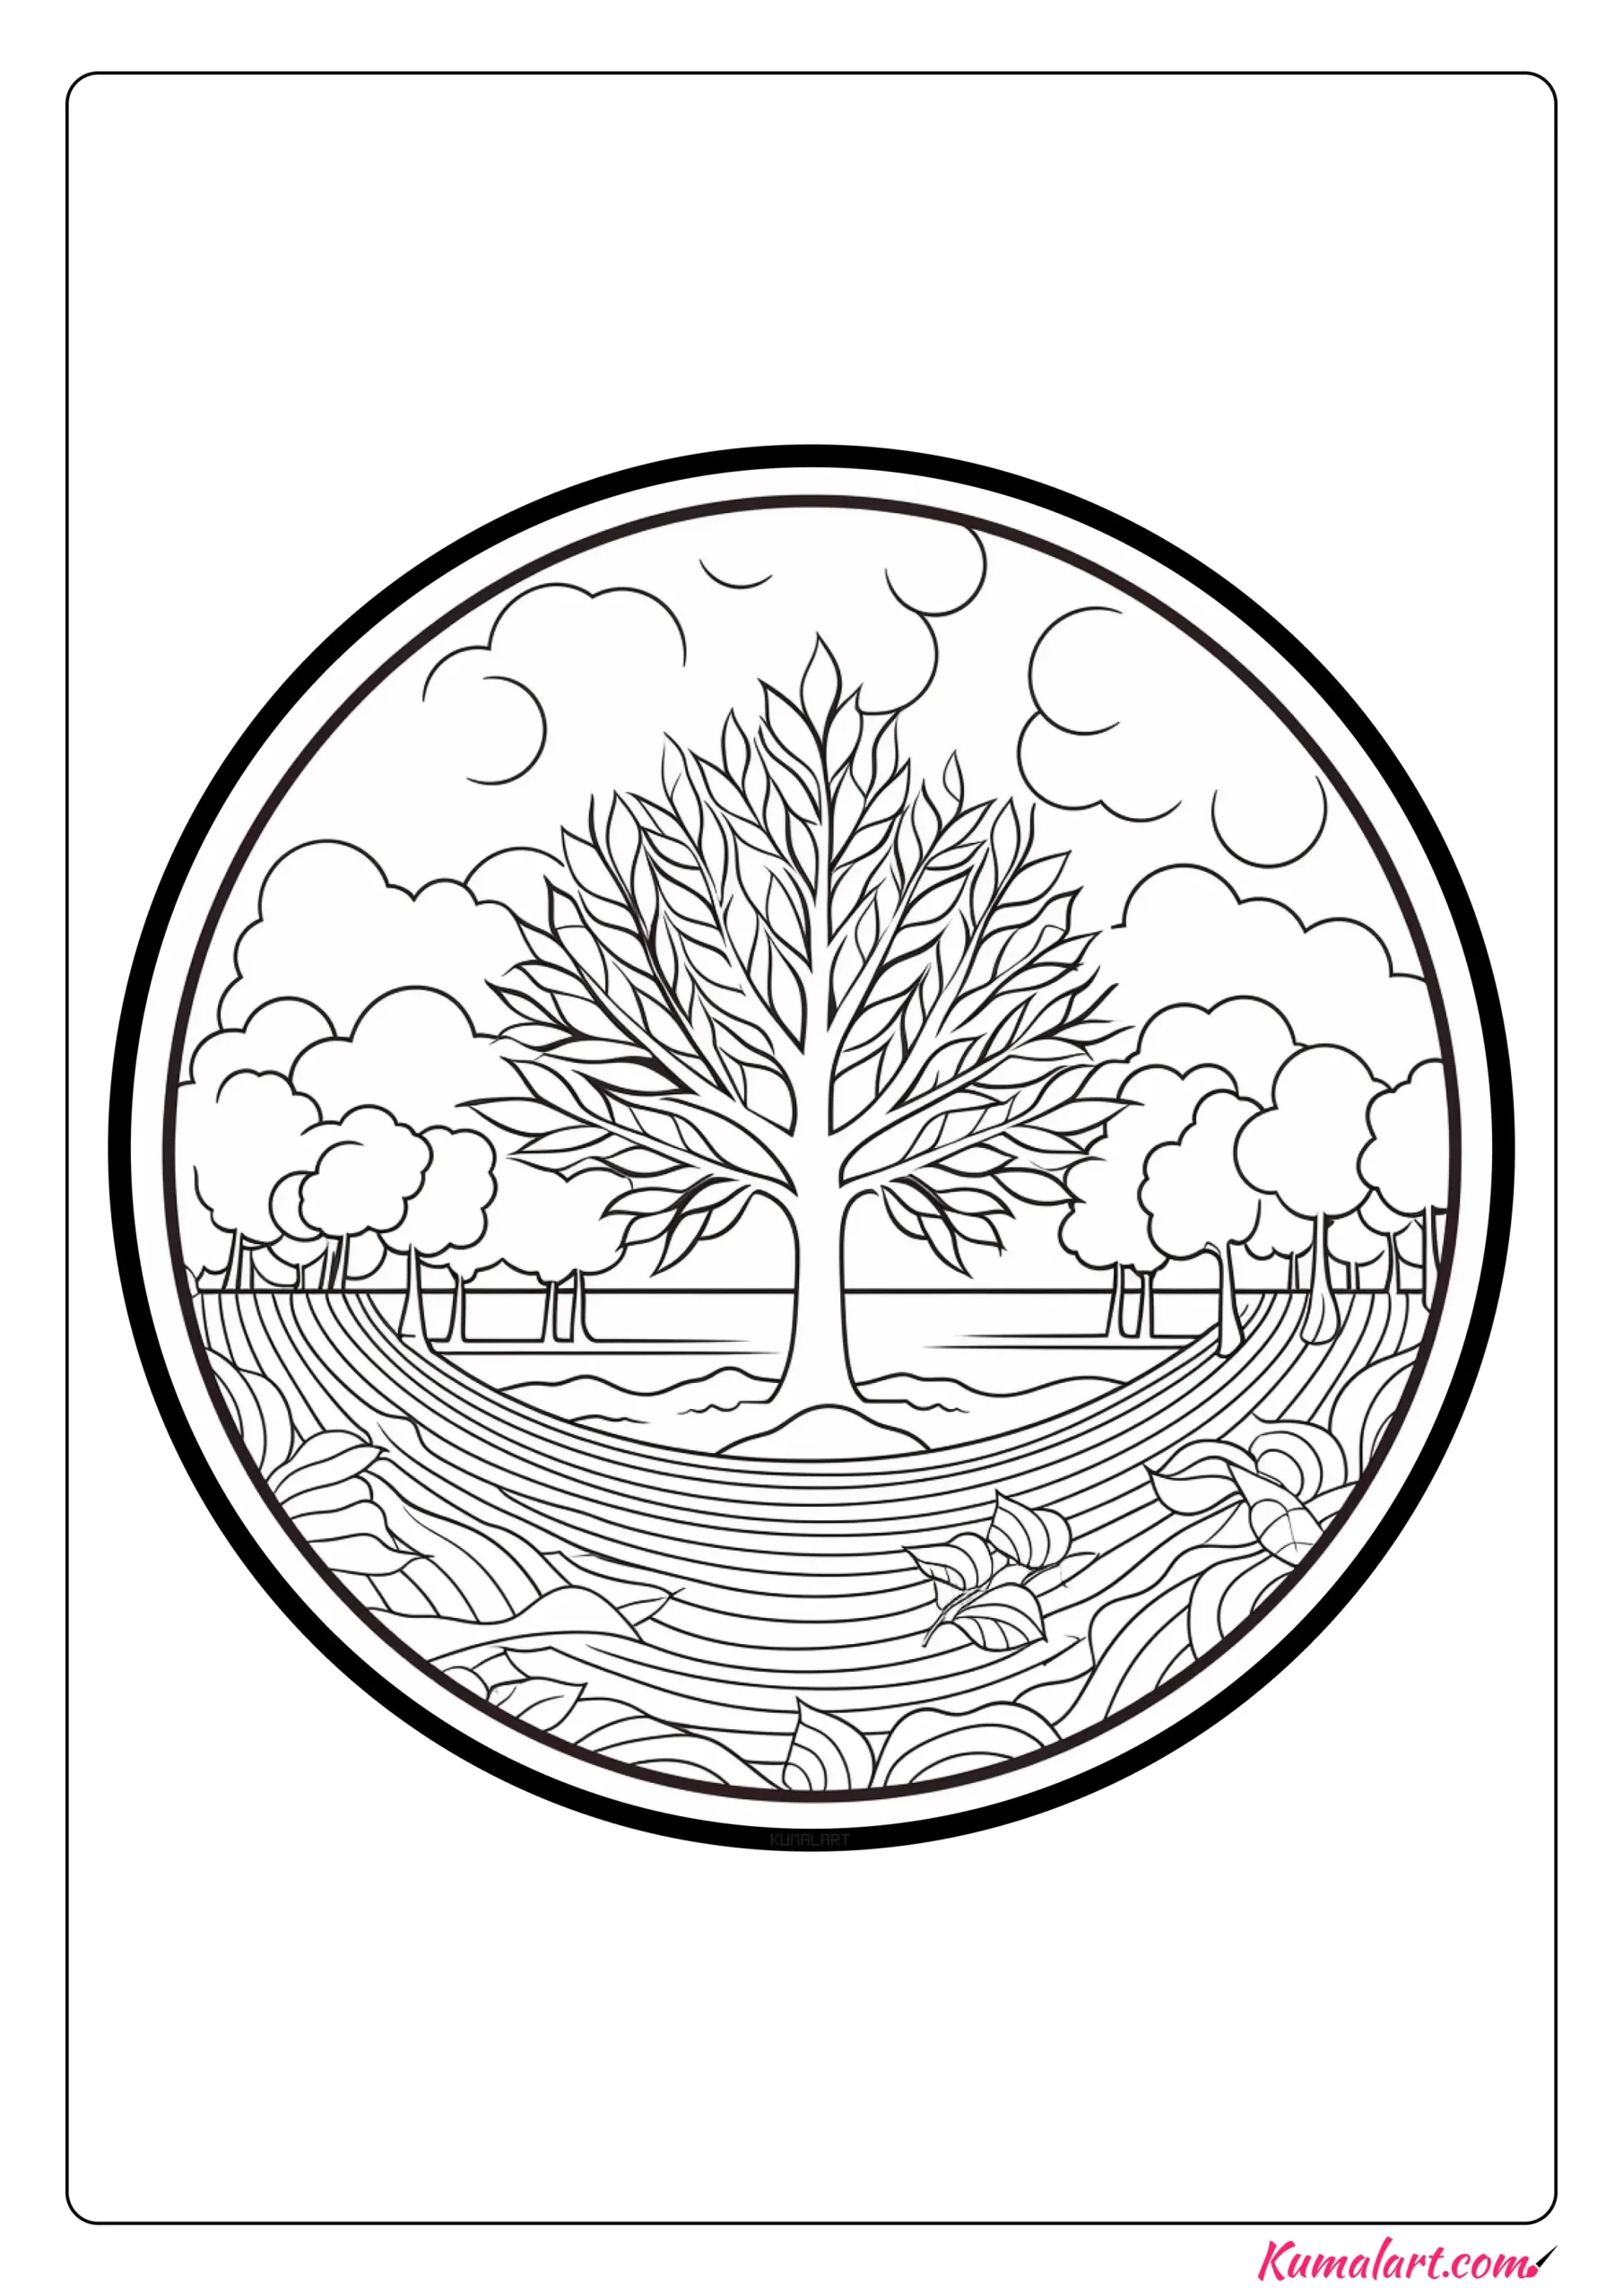 Chilly Autumn Mandala Coloring Page